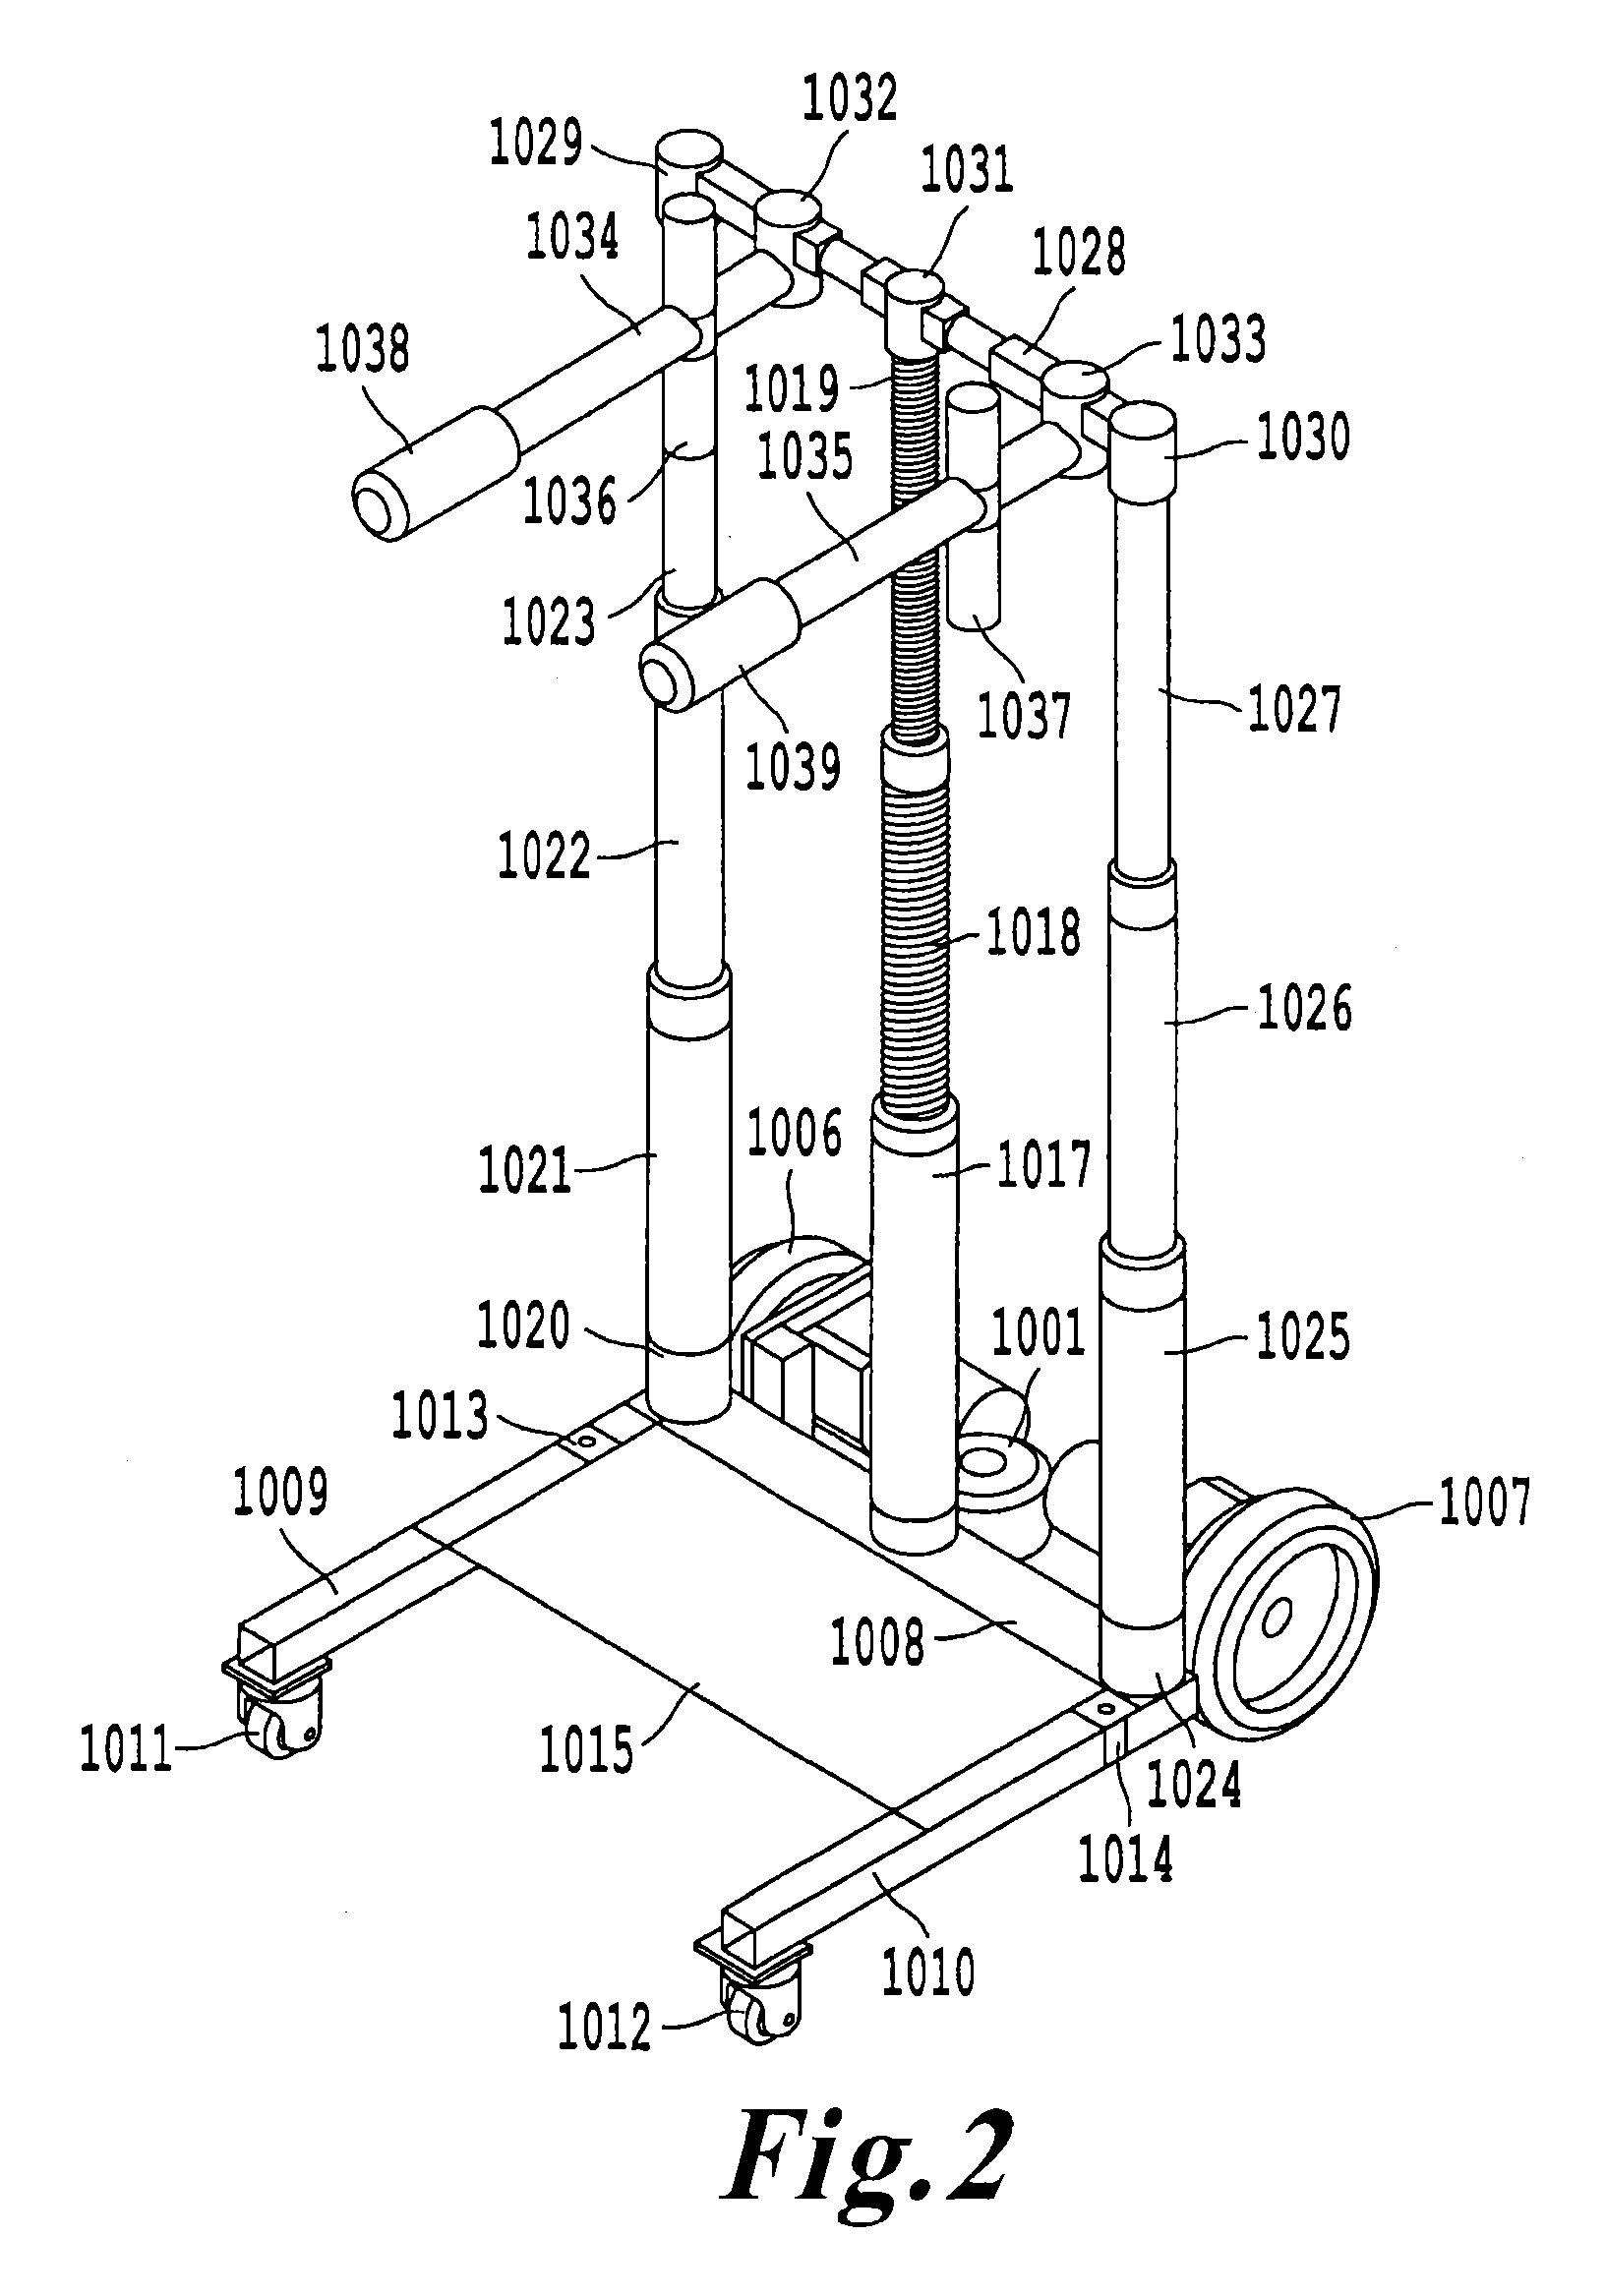 Portable multifunctional mobility aid apparatus